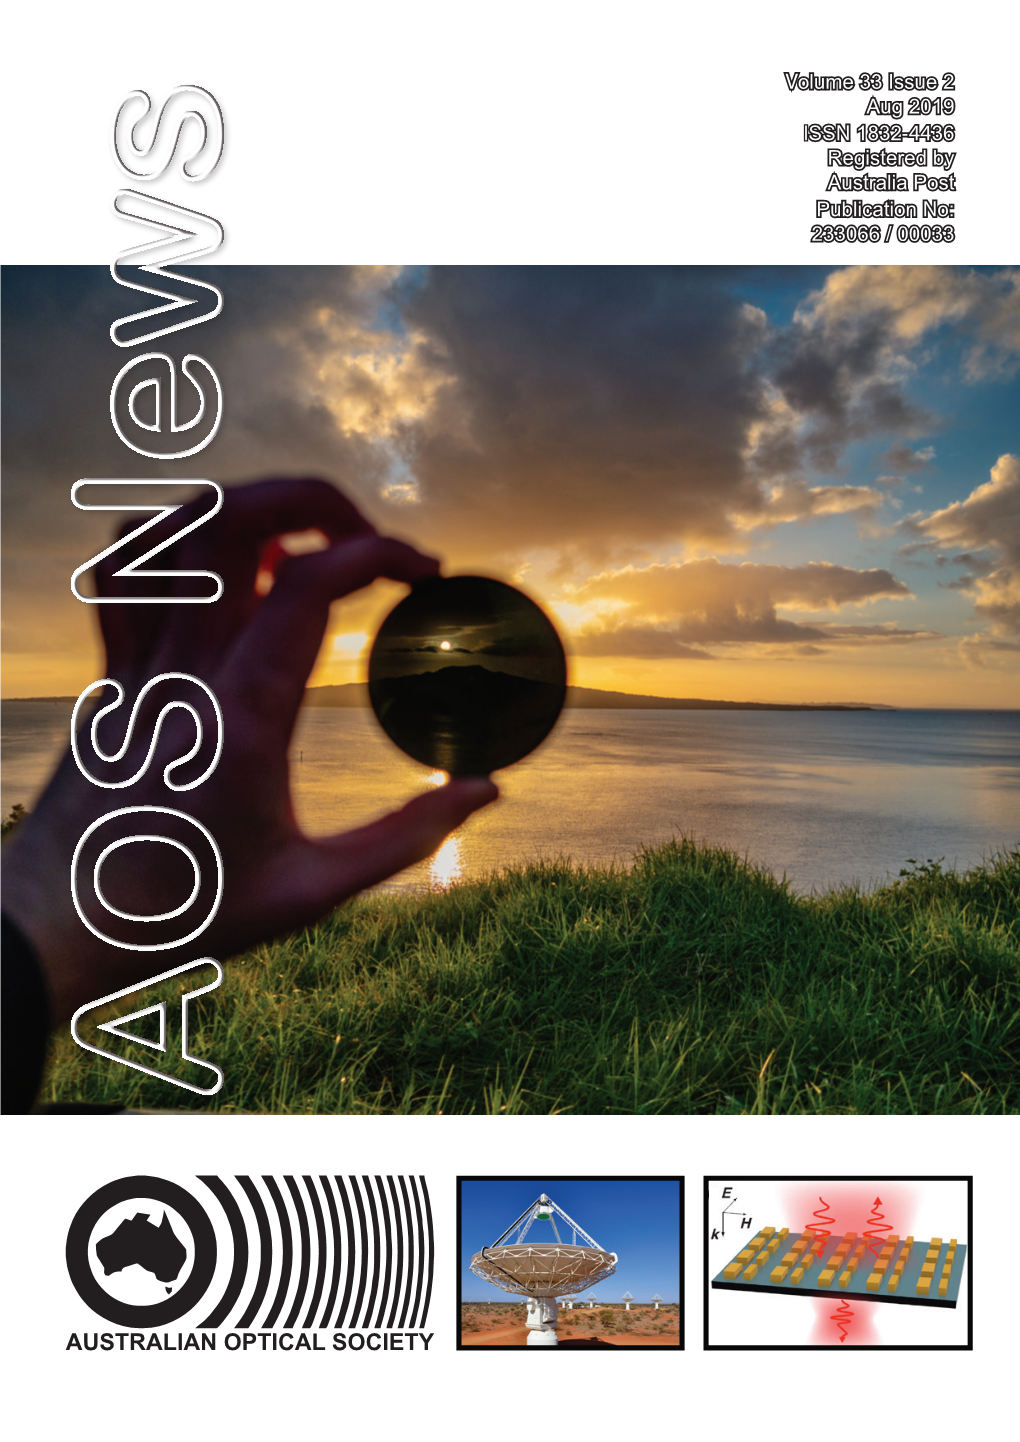 Volume 33 Issue 2 Aug 2019 Lssn 1832-4436 Registered by Australia Post Publication No: 233066 / 00033